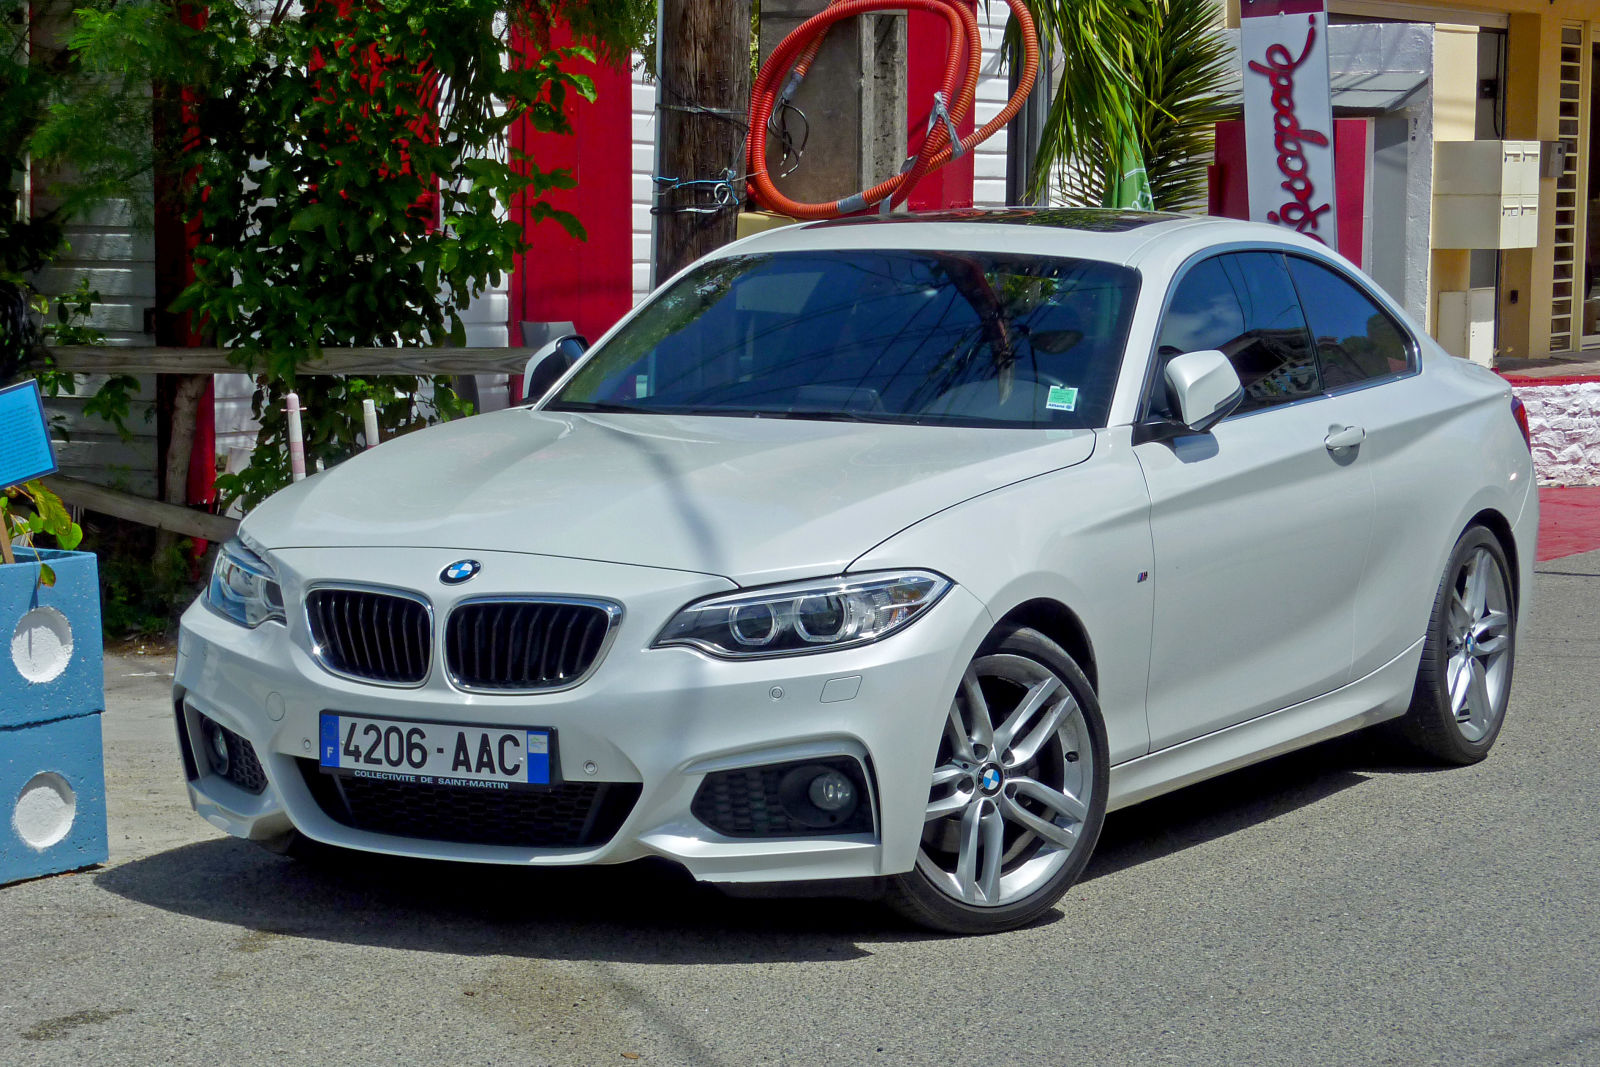 BMW 2-series M Sport (but not an M235i/M240i judging by the single exhaust)